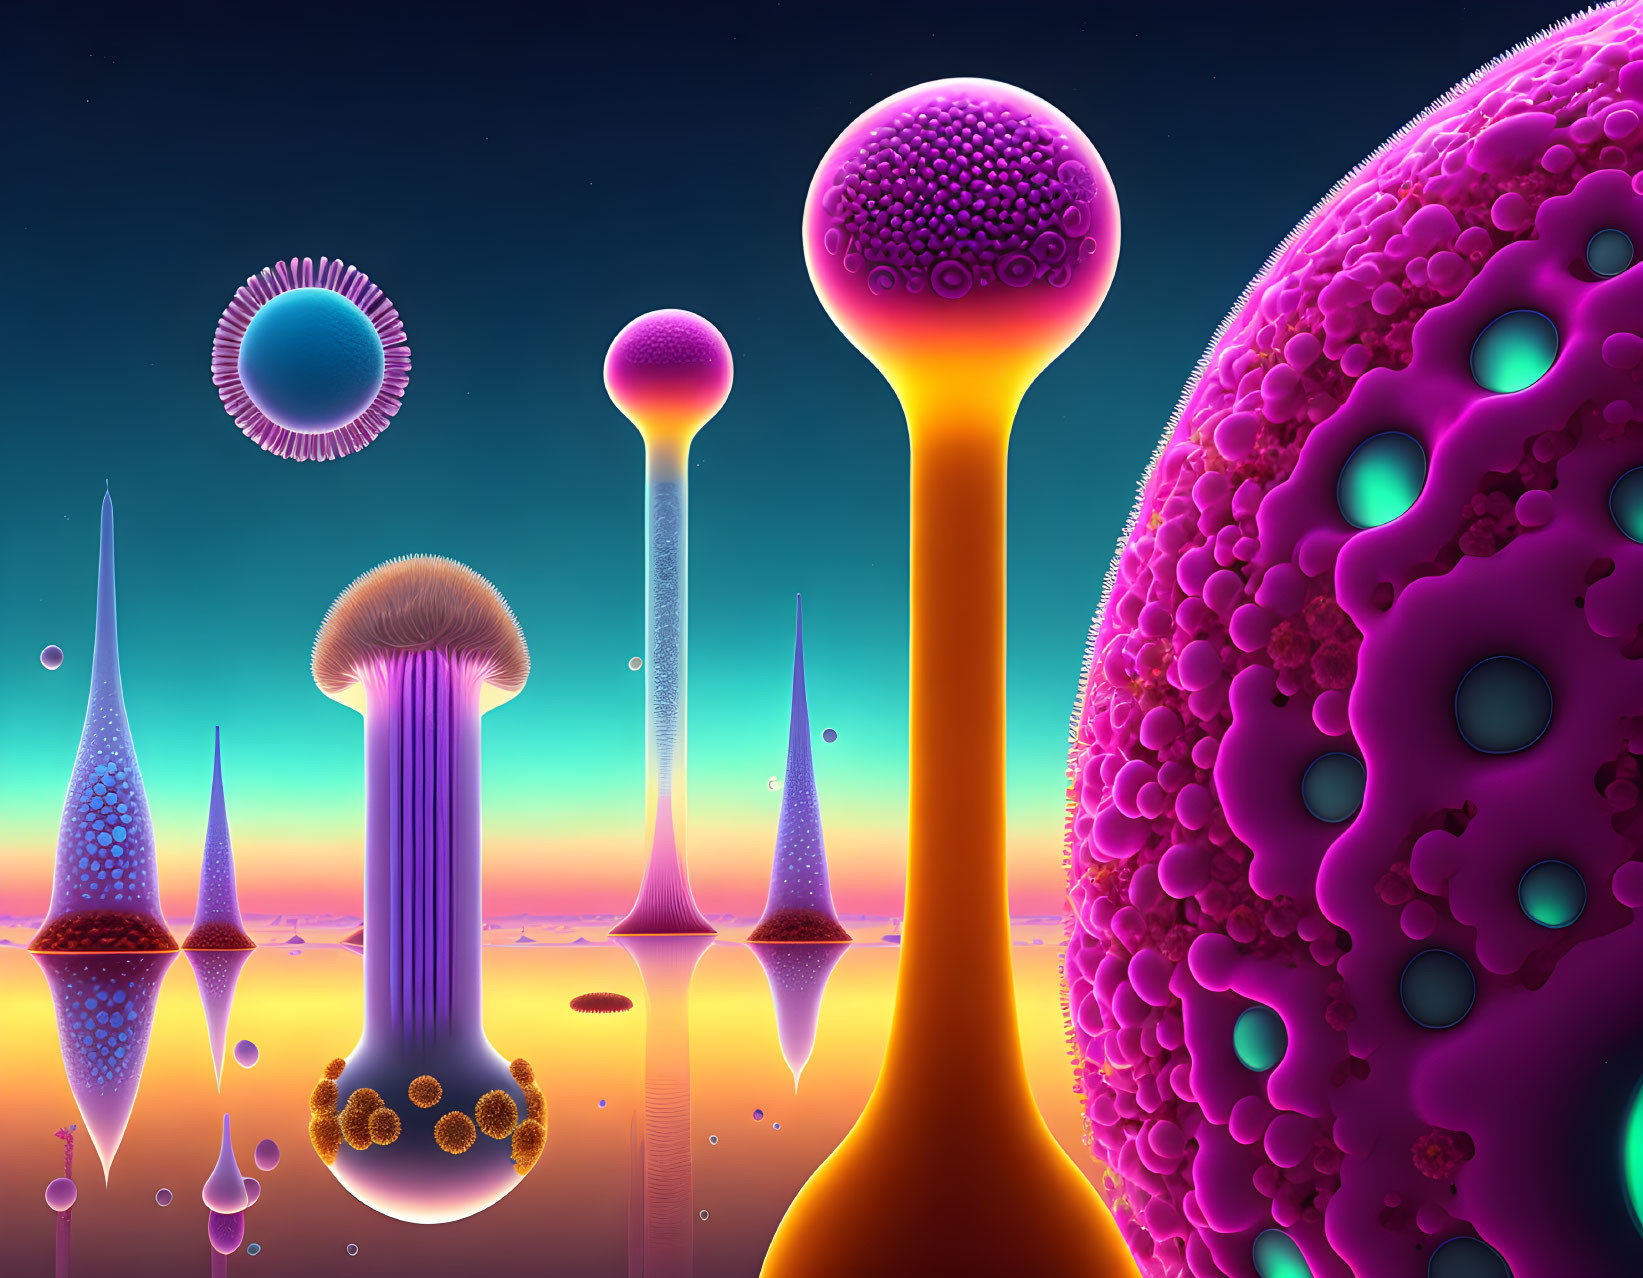 Surreal neon-colored alien structures on glossy surface